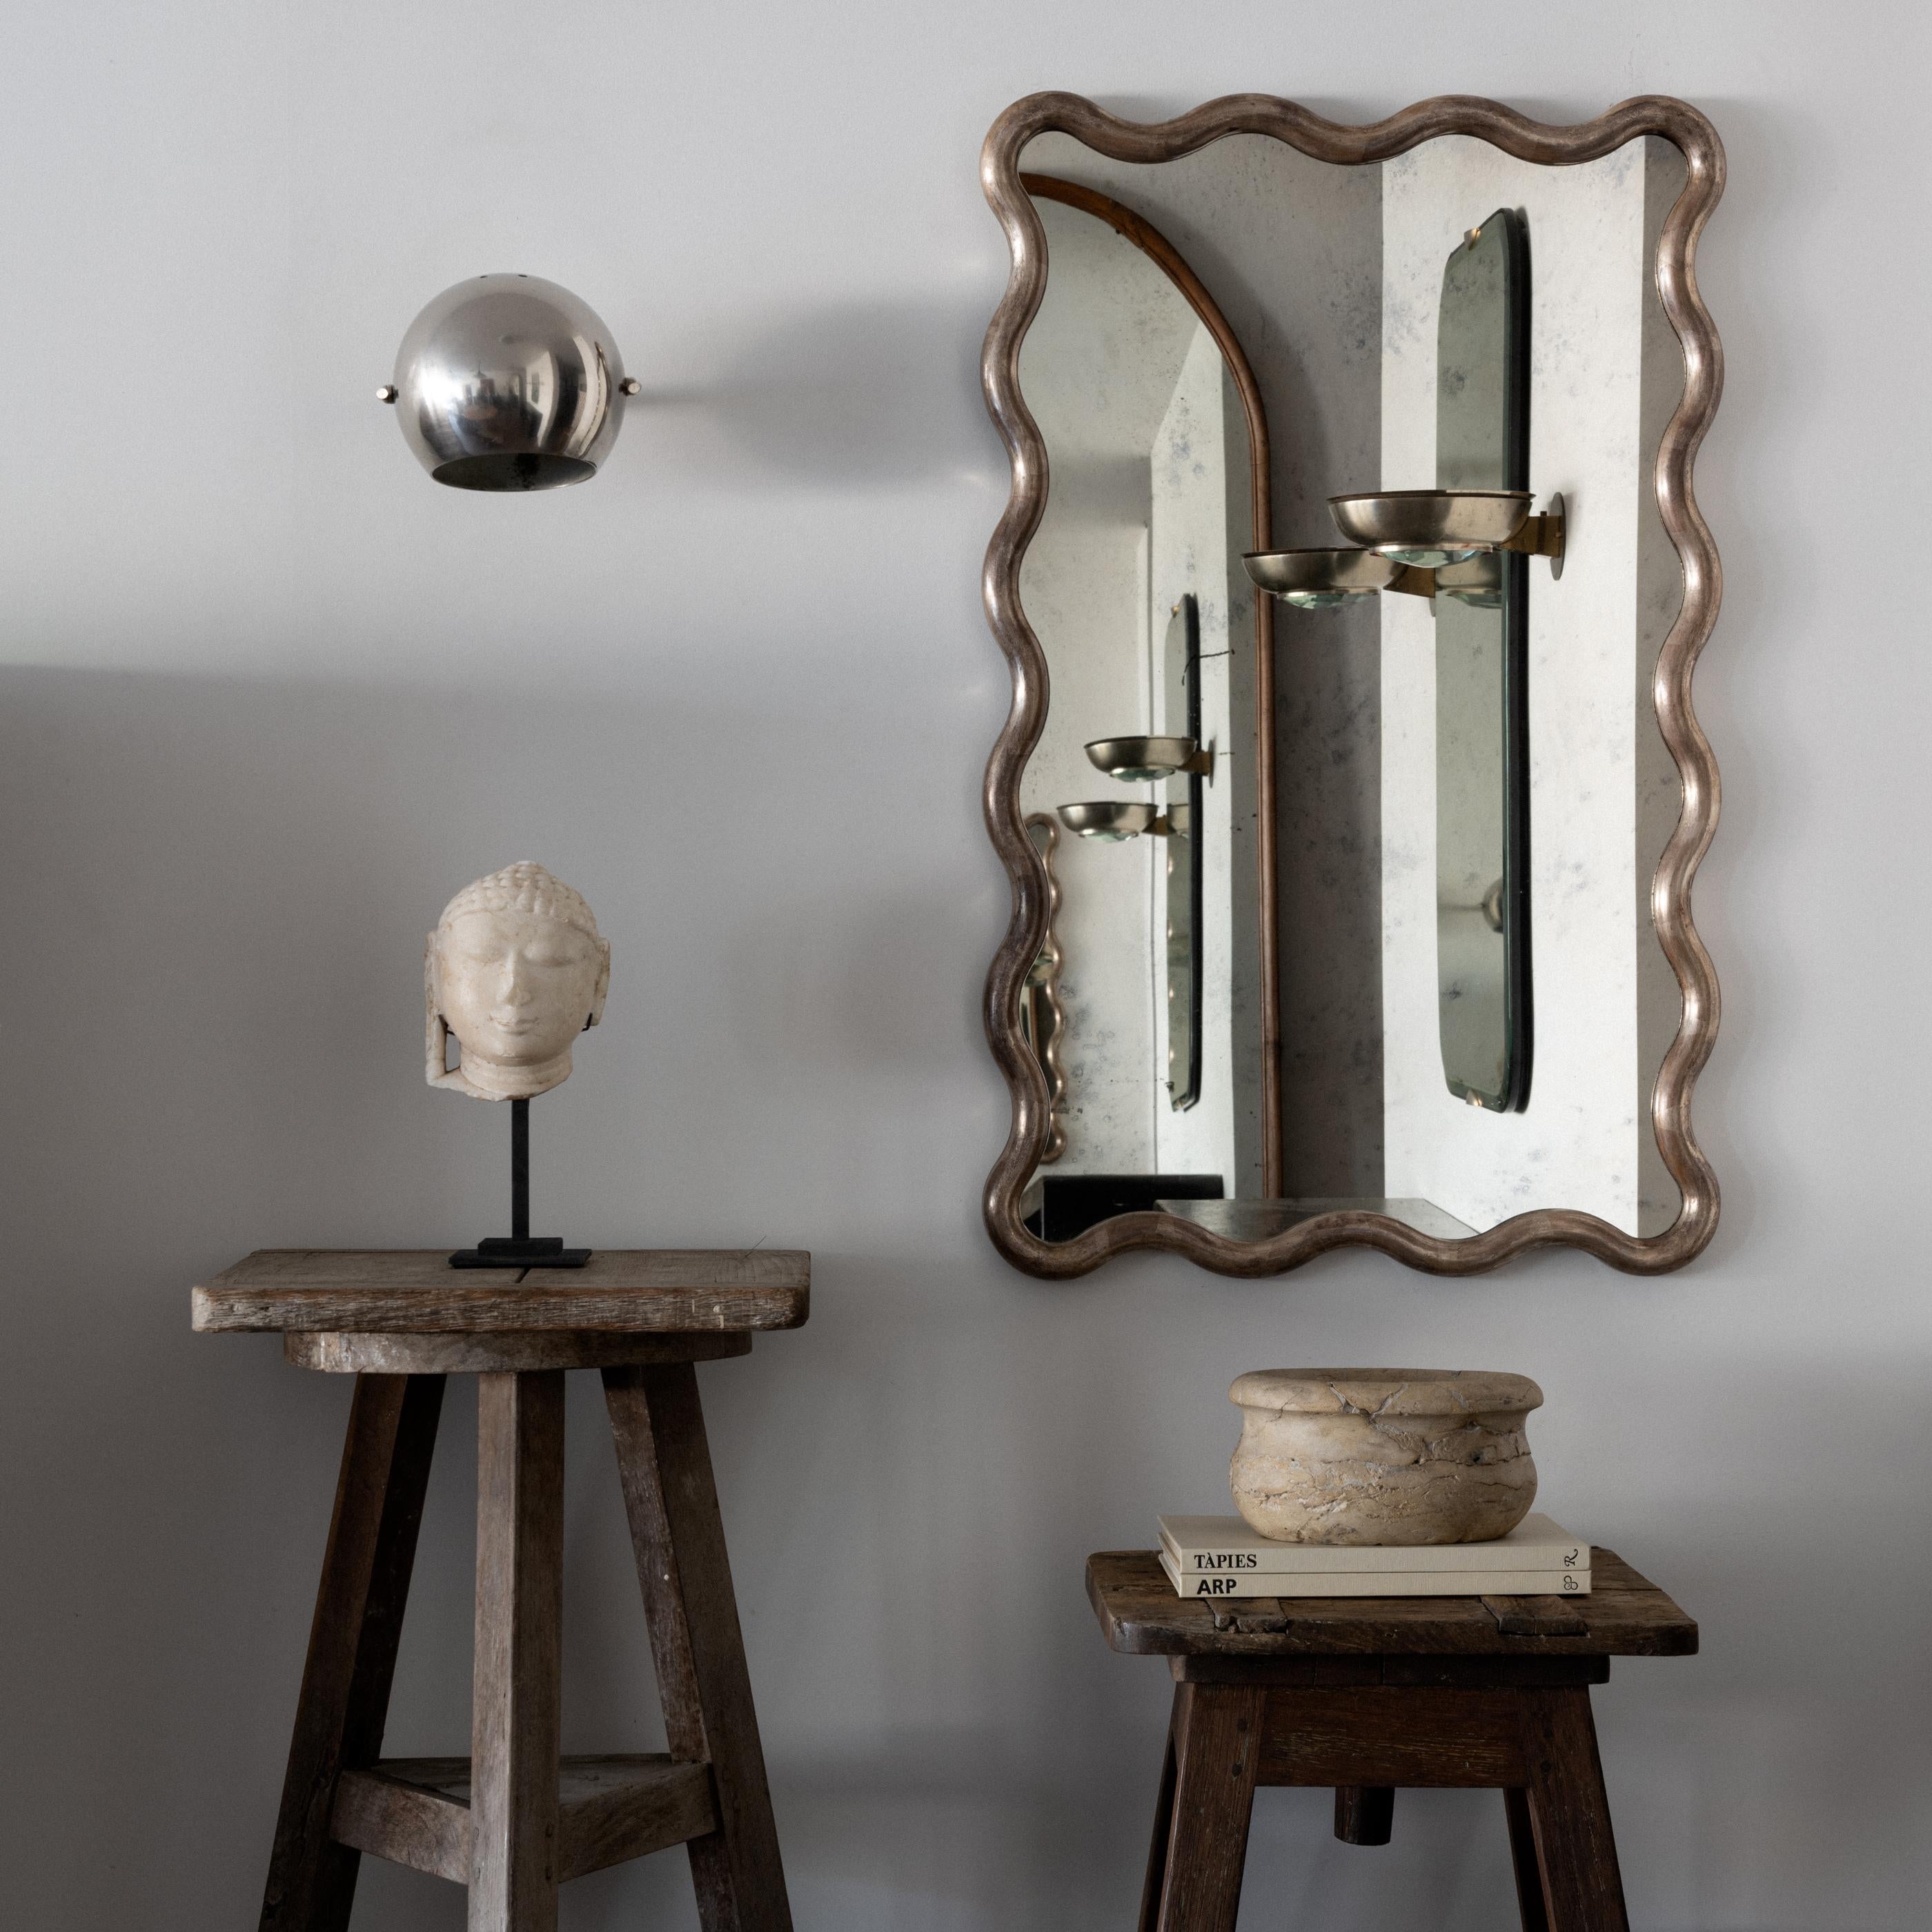 Italian silver leaf mirror based on a 1940's design. Hand made in Milan, Italy. 

Available in different finishes.